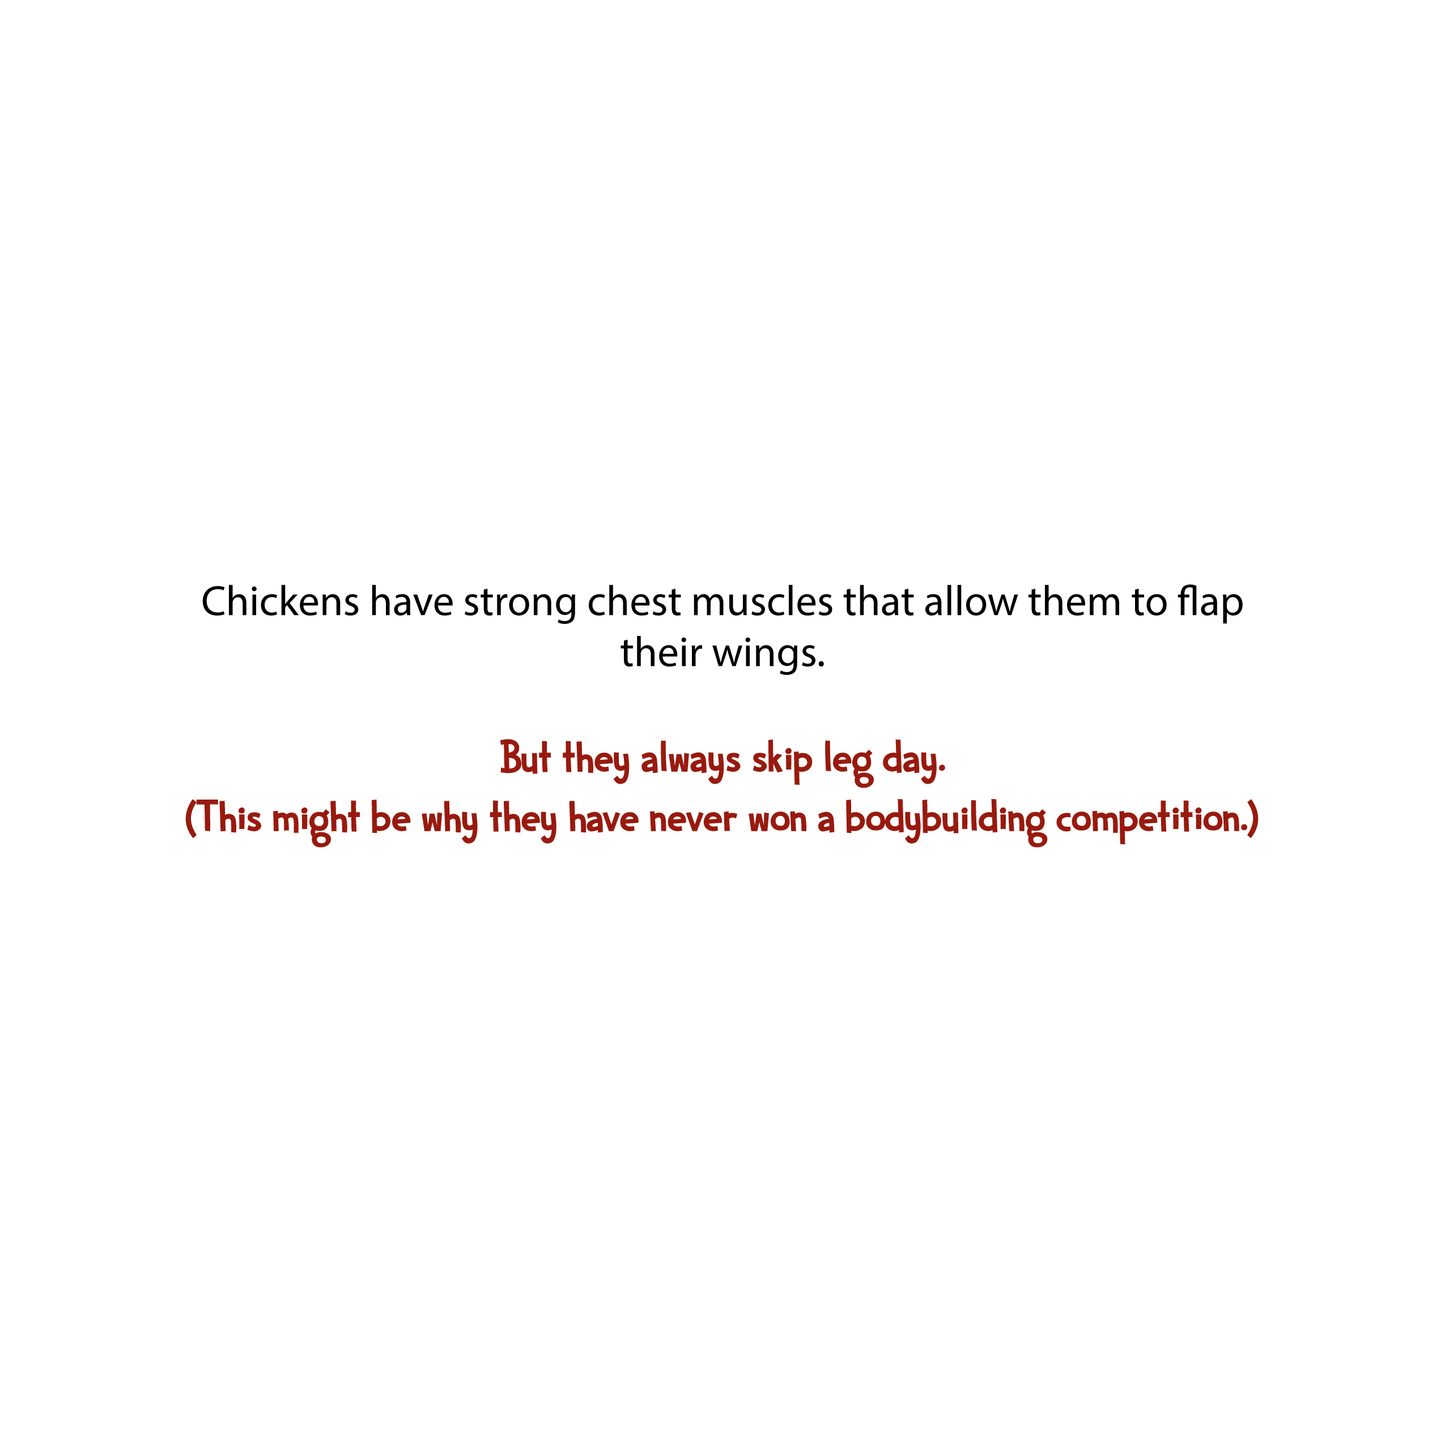 Waffles the Chicken Presents 100% True Facts About Chickens